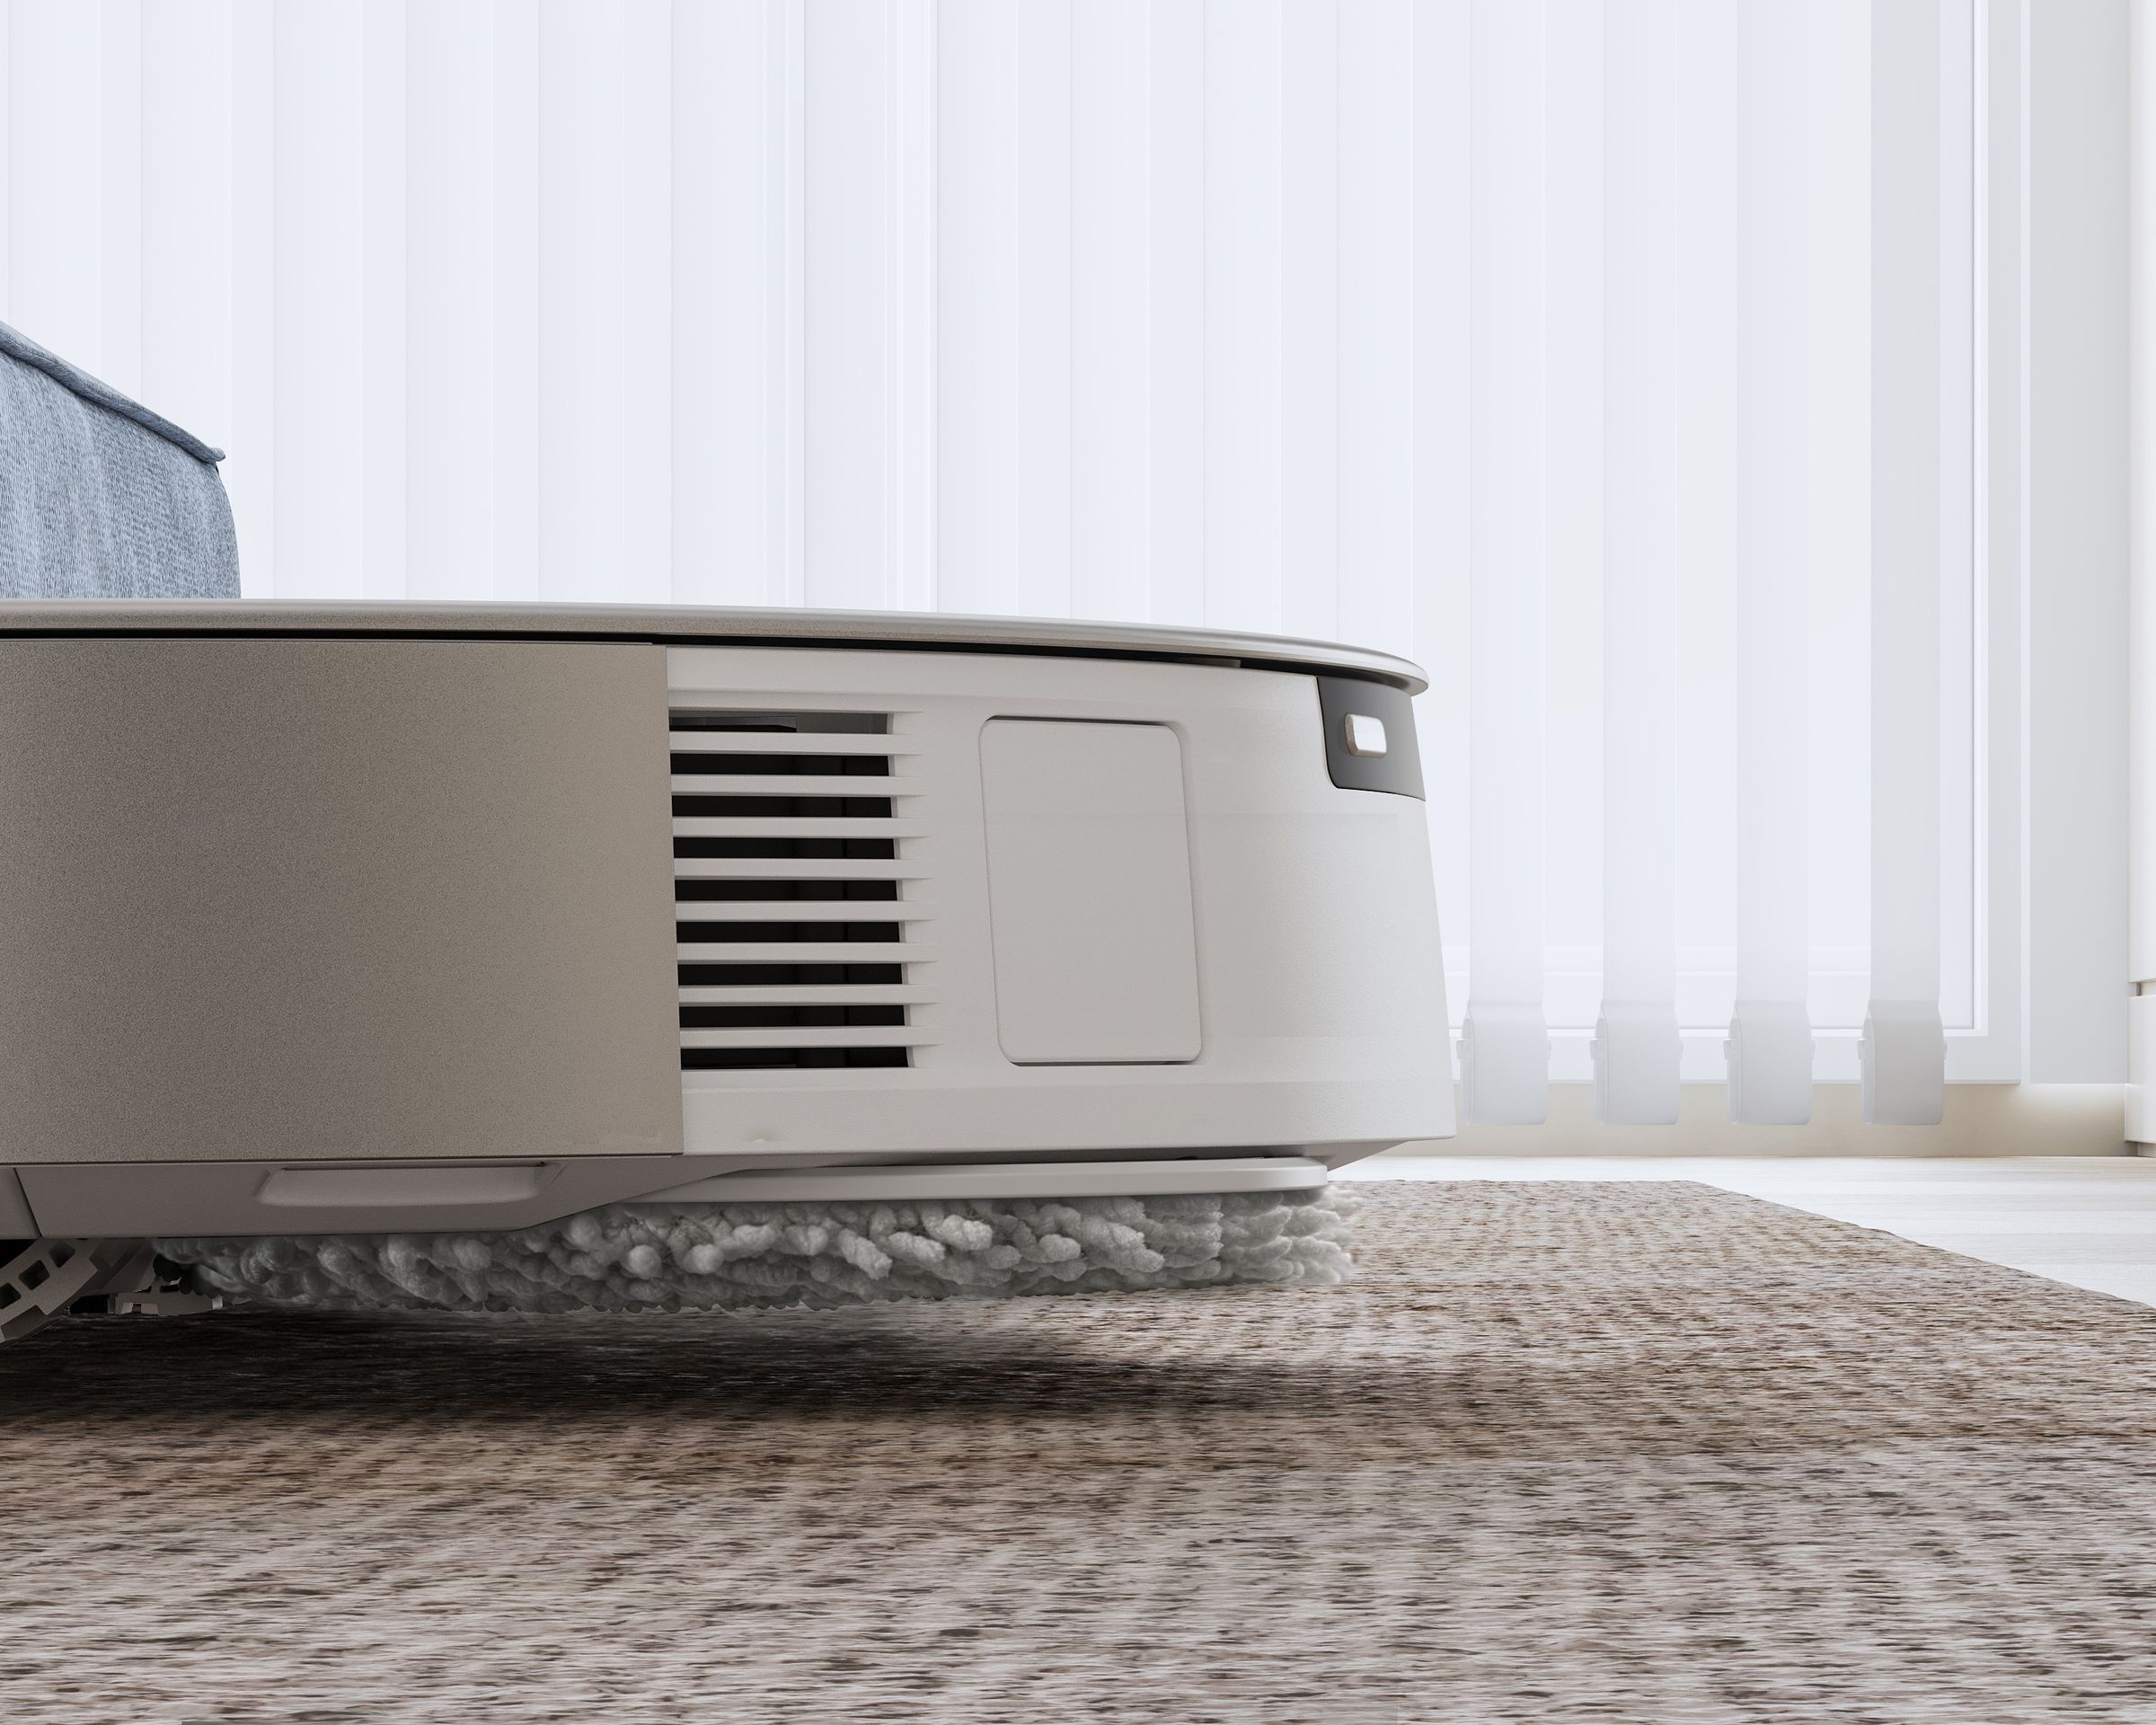 The latest robot vacuums have new tricks, like this Ecovacs model that lifts its mop 9mm off the floor.